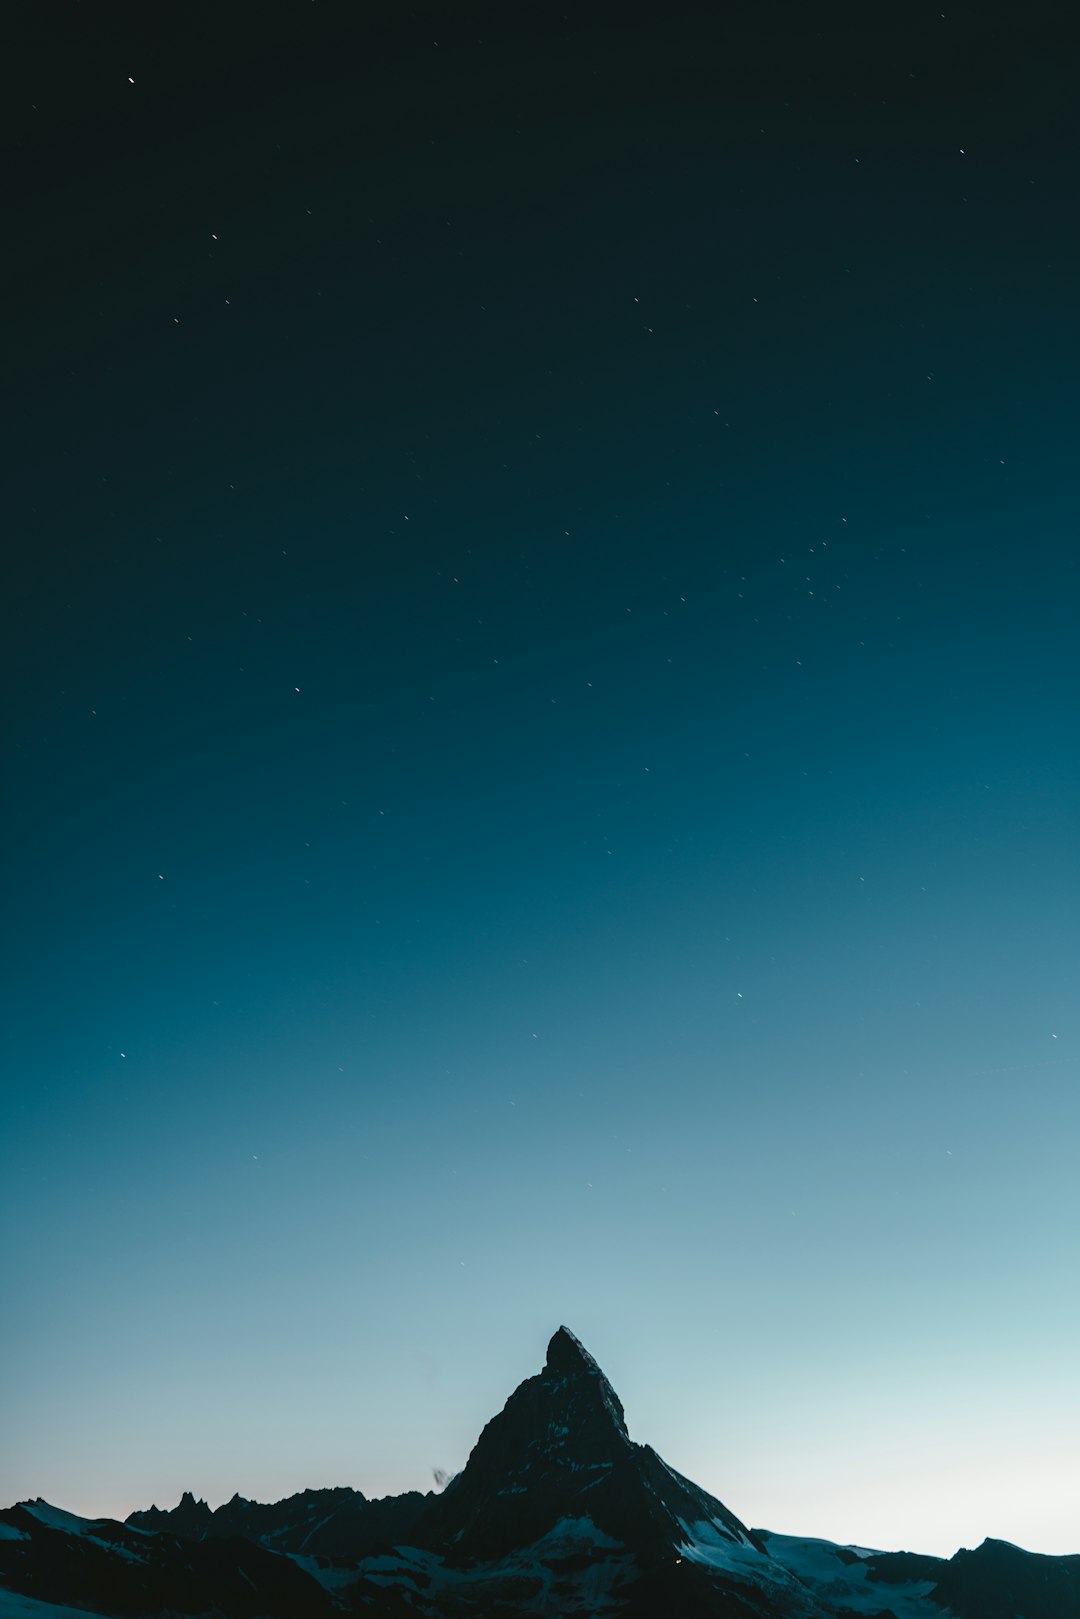 silhouette of mountain under blue sky during night time